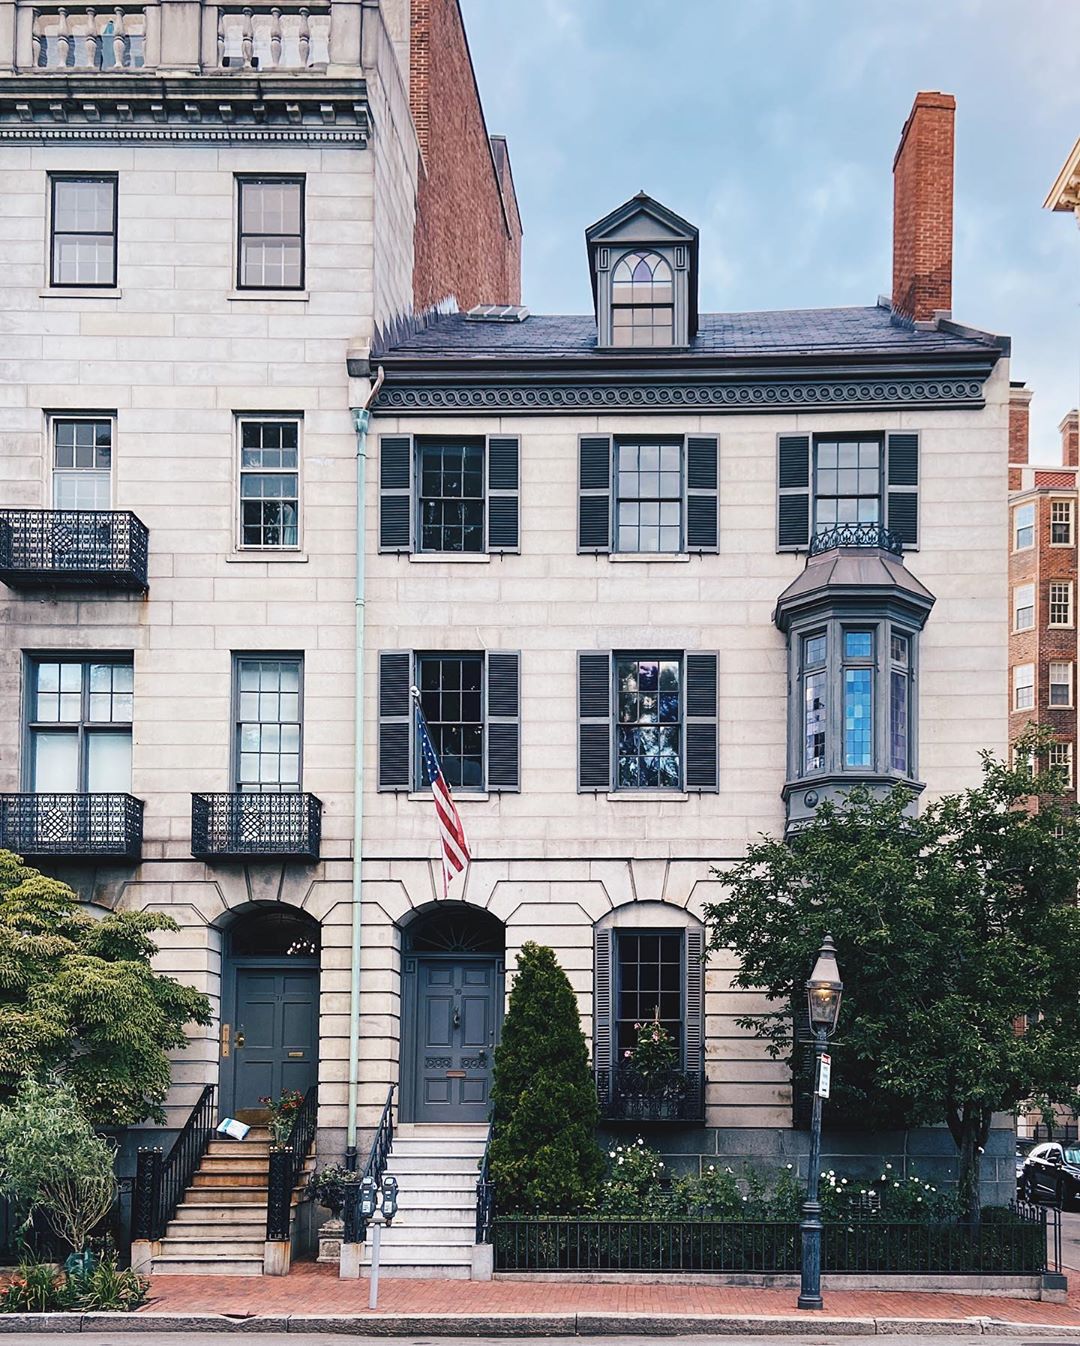 White Stone Townhome in Beacon Hill, Boston. Photo by Instagram user @perlafdez